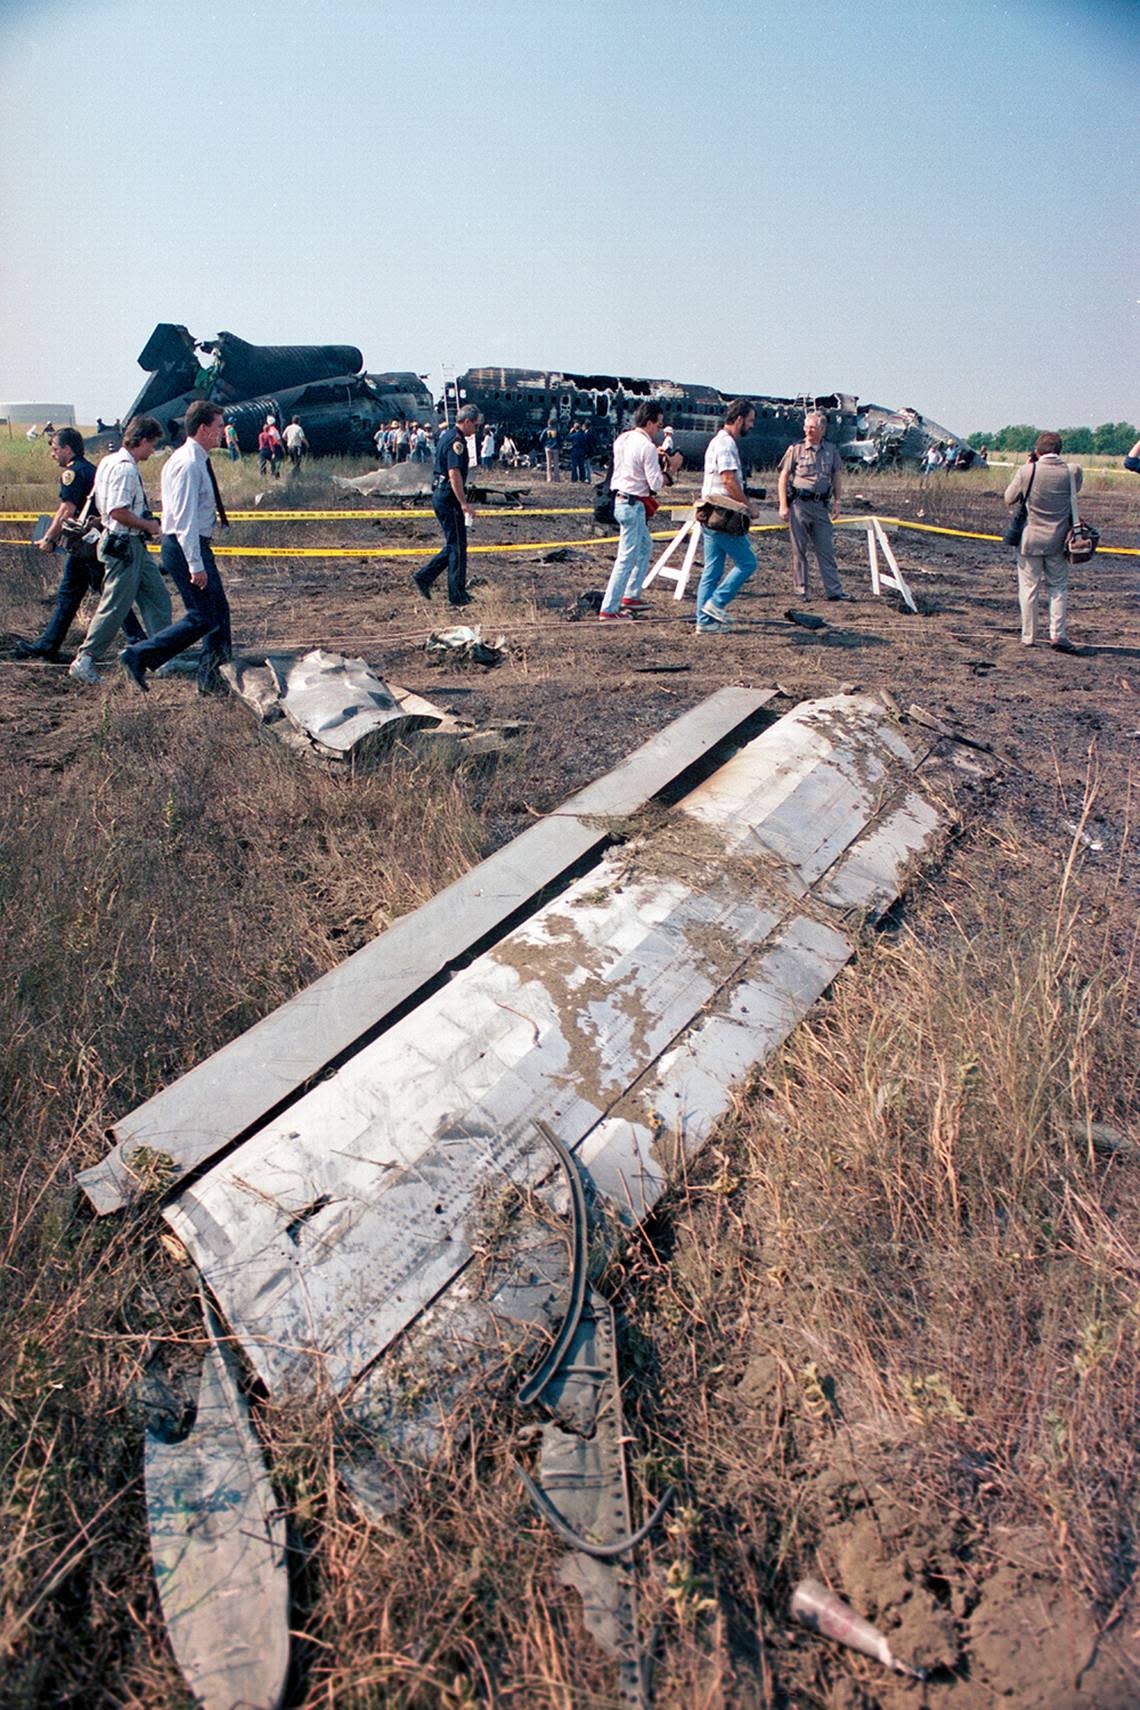 Aug. 31, 1988: What appears to be a piece of the Boeing 727’s wing assembly in the dirt along the path of where Delta 1141 skidded into the grass after a failed takeoff at Dallas-Fort Worth International Airport.